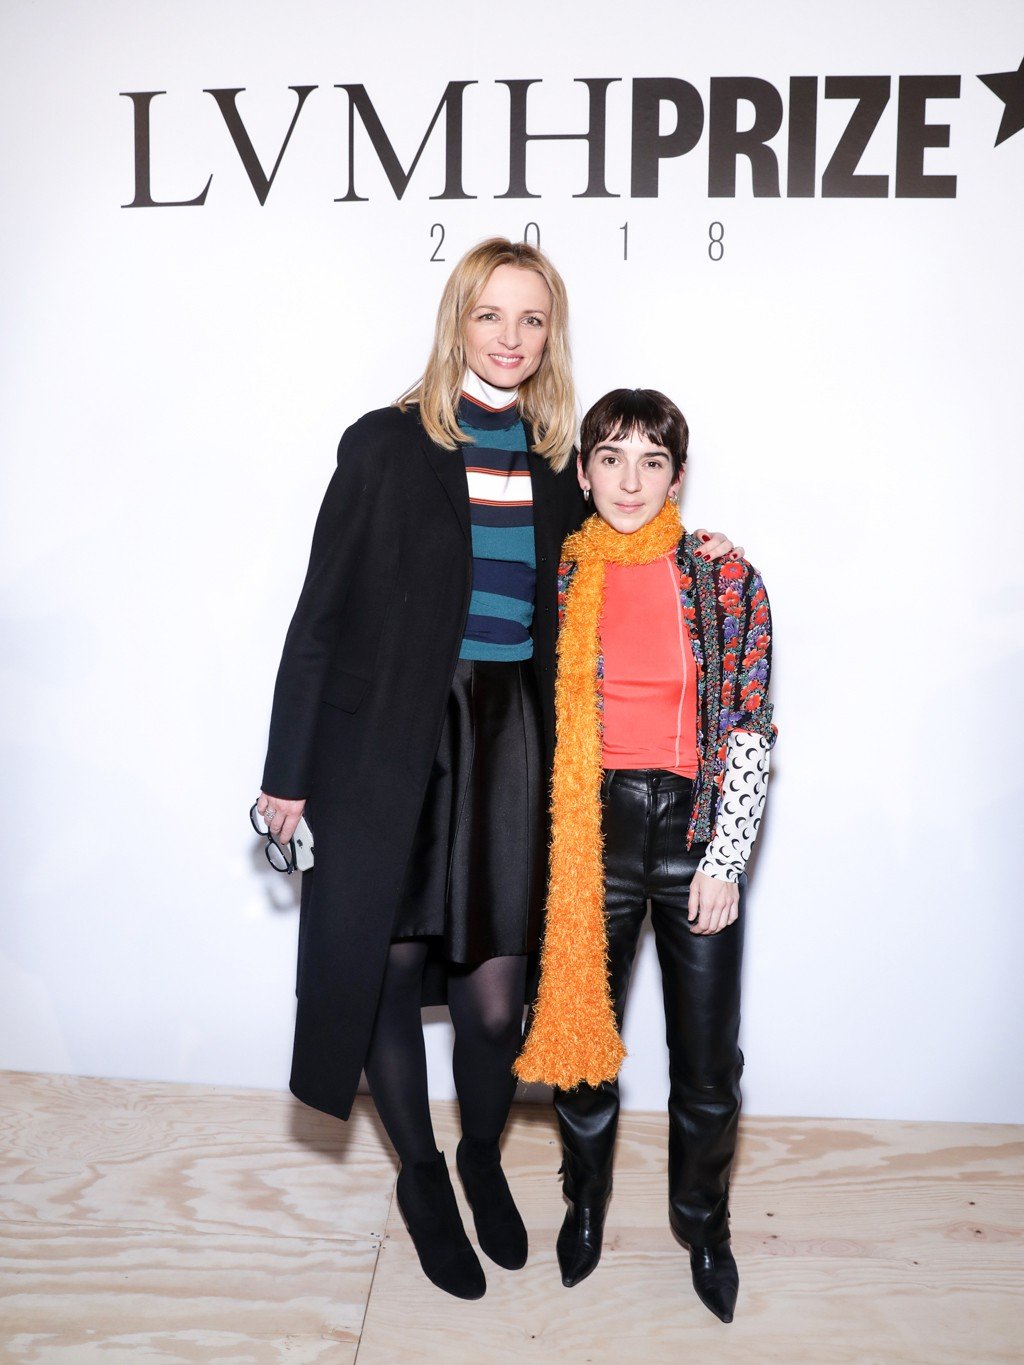 Delphine Arnault and 2017 LVMH Prize winner Marine Serre at this year’s LVMH Prize shortlist presentation event in Paris. Photo: Francois Goize